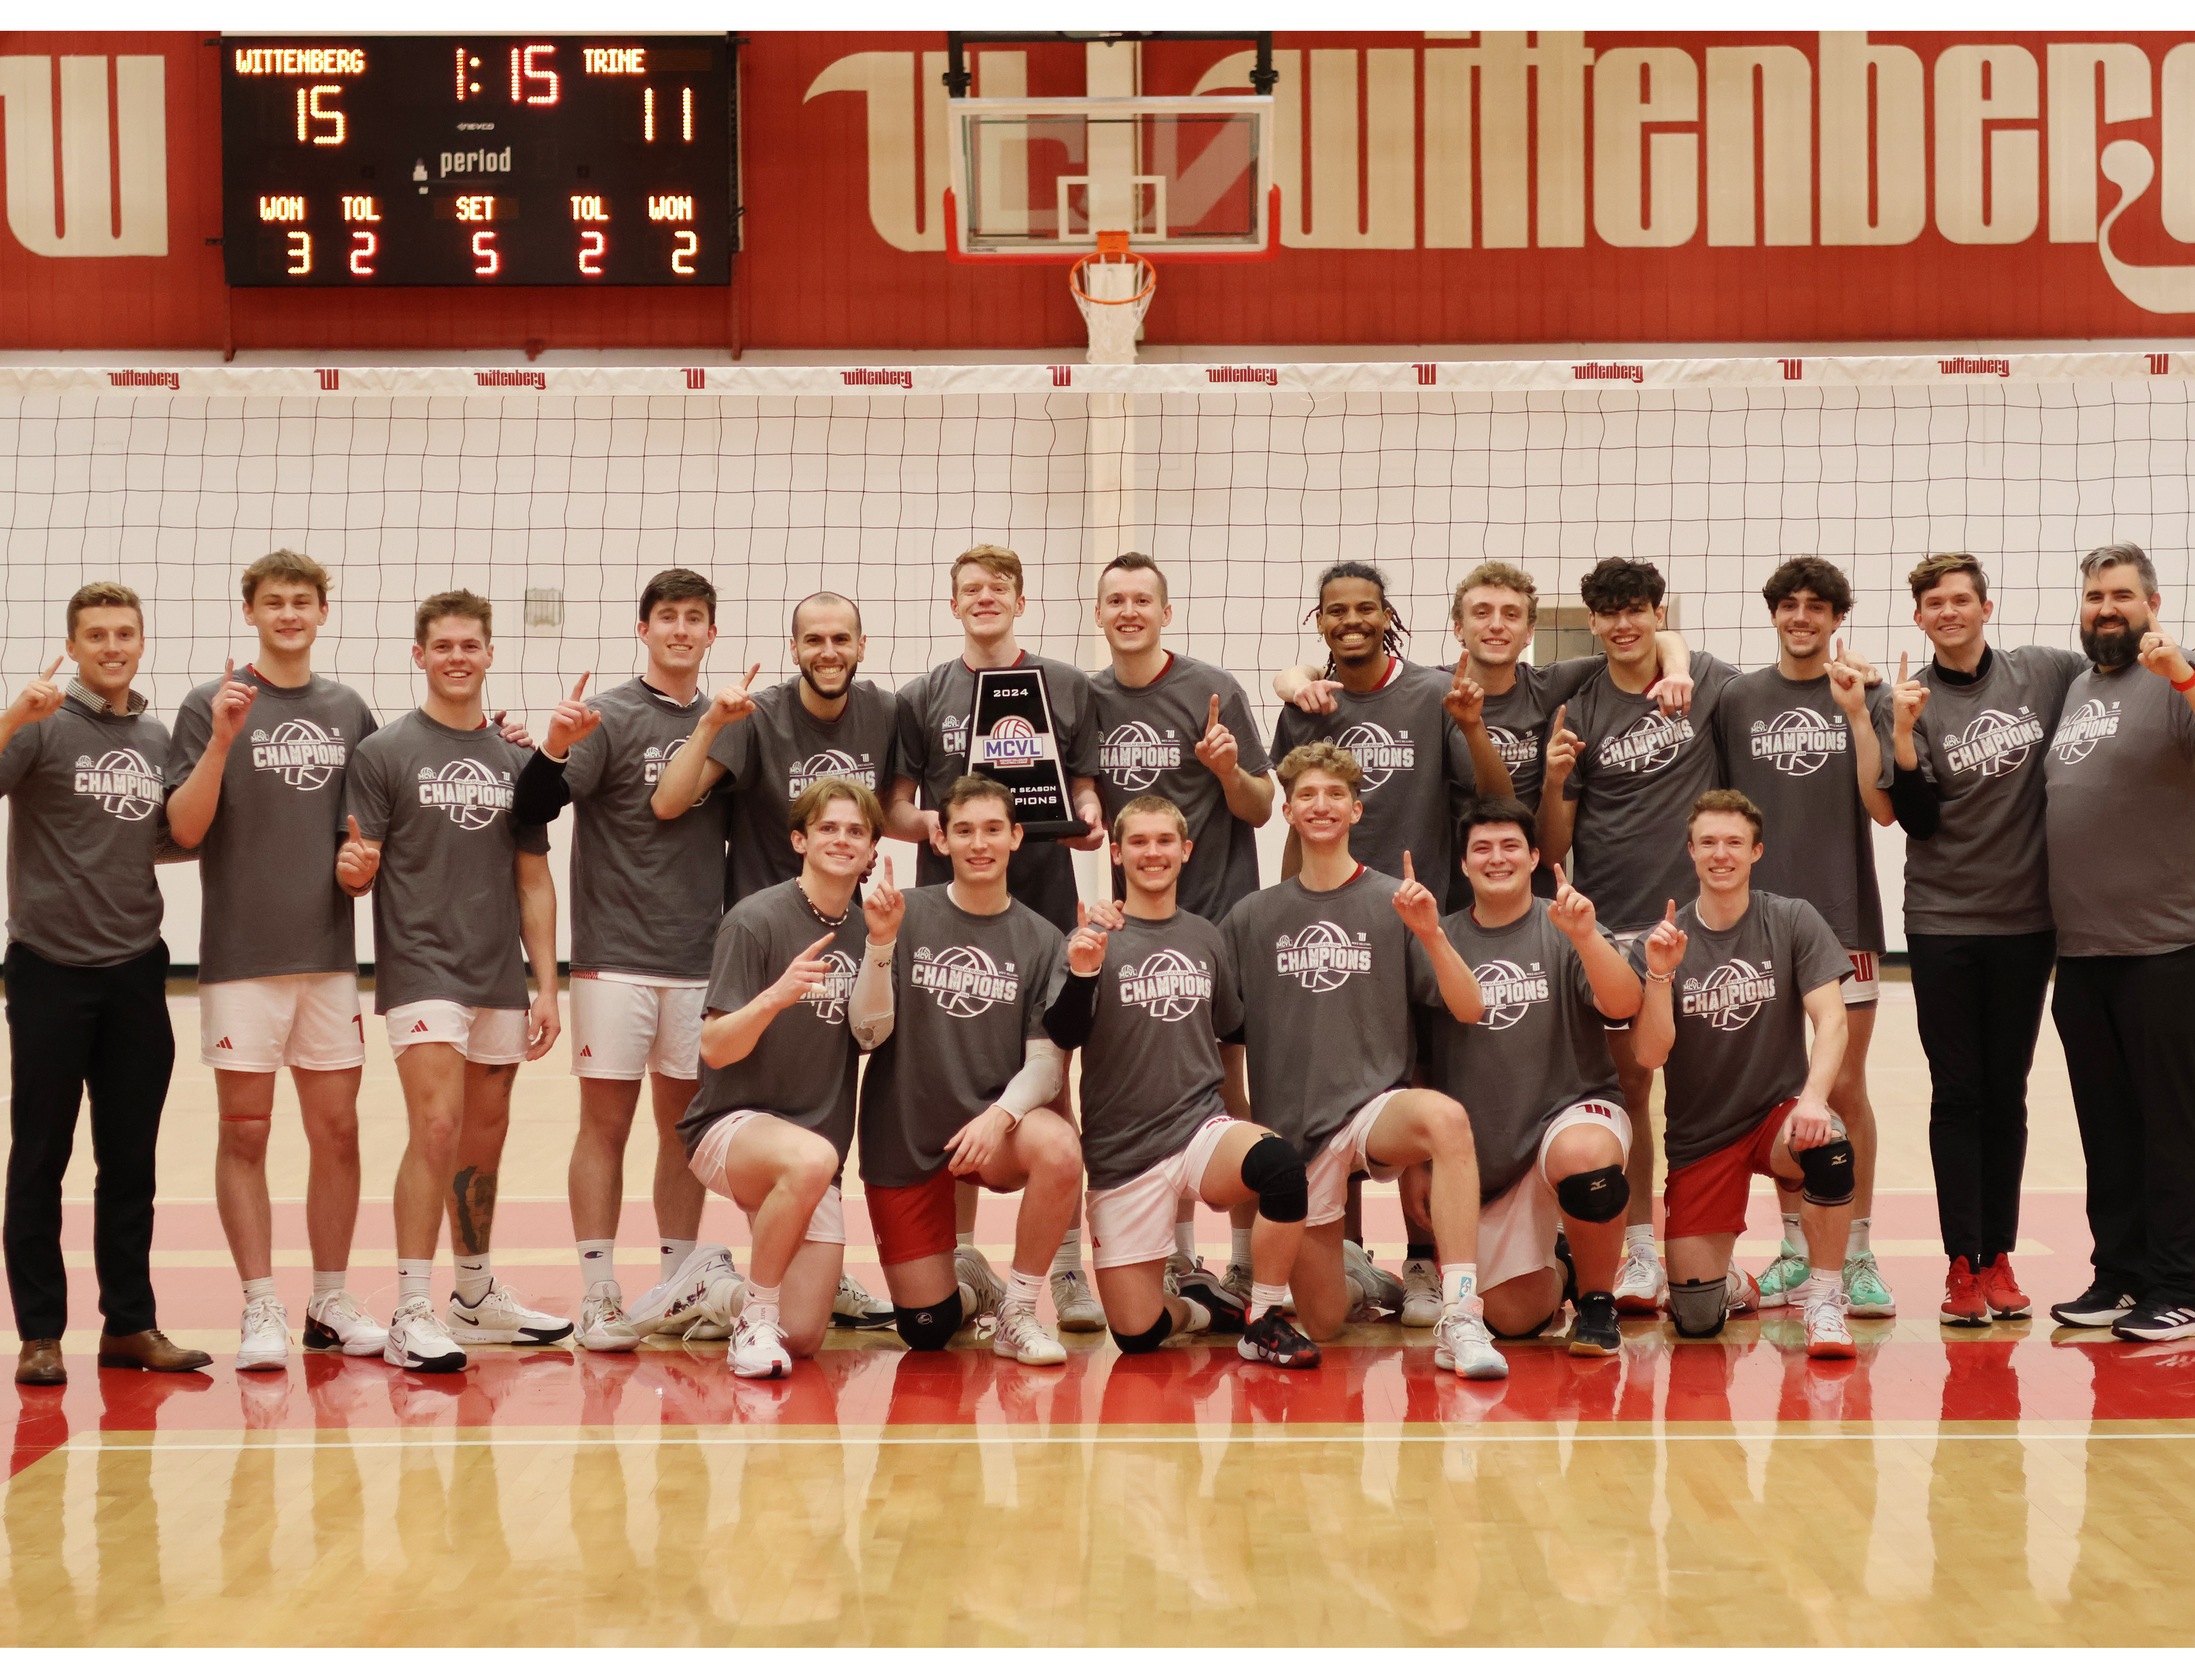 Men's volleyball clinches MCVL regular-season championship with thrilling 5-set win over Trine